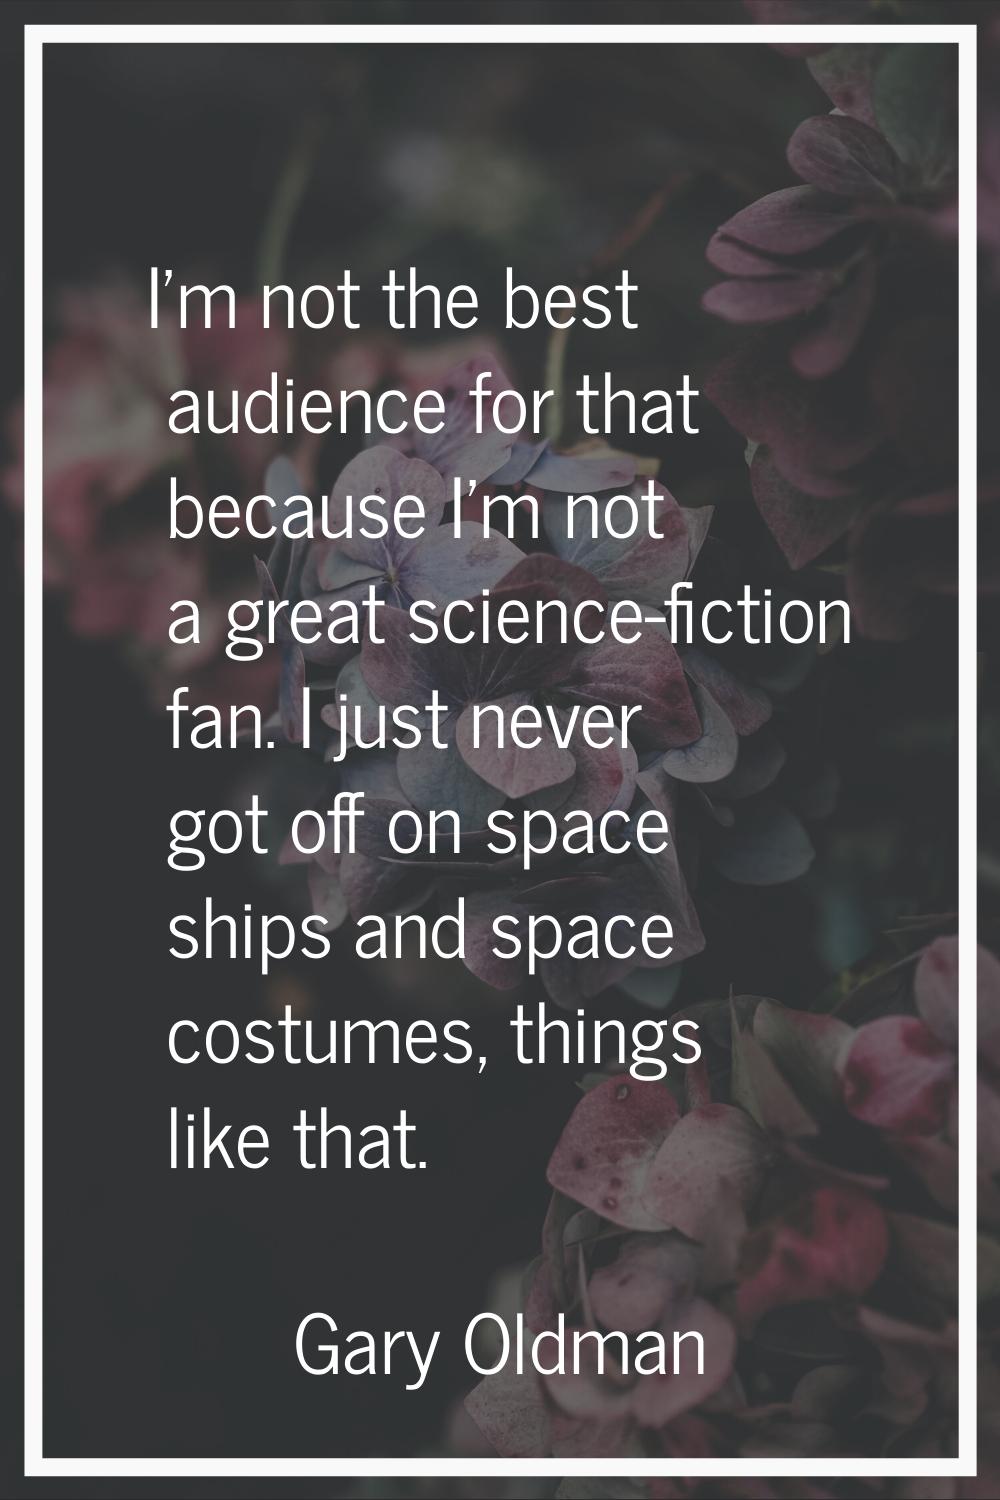 I'm not the best audience for that because I'm not a great science-fiction fan. I just never got of